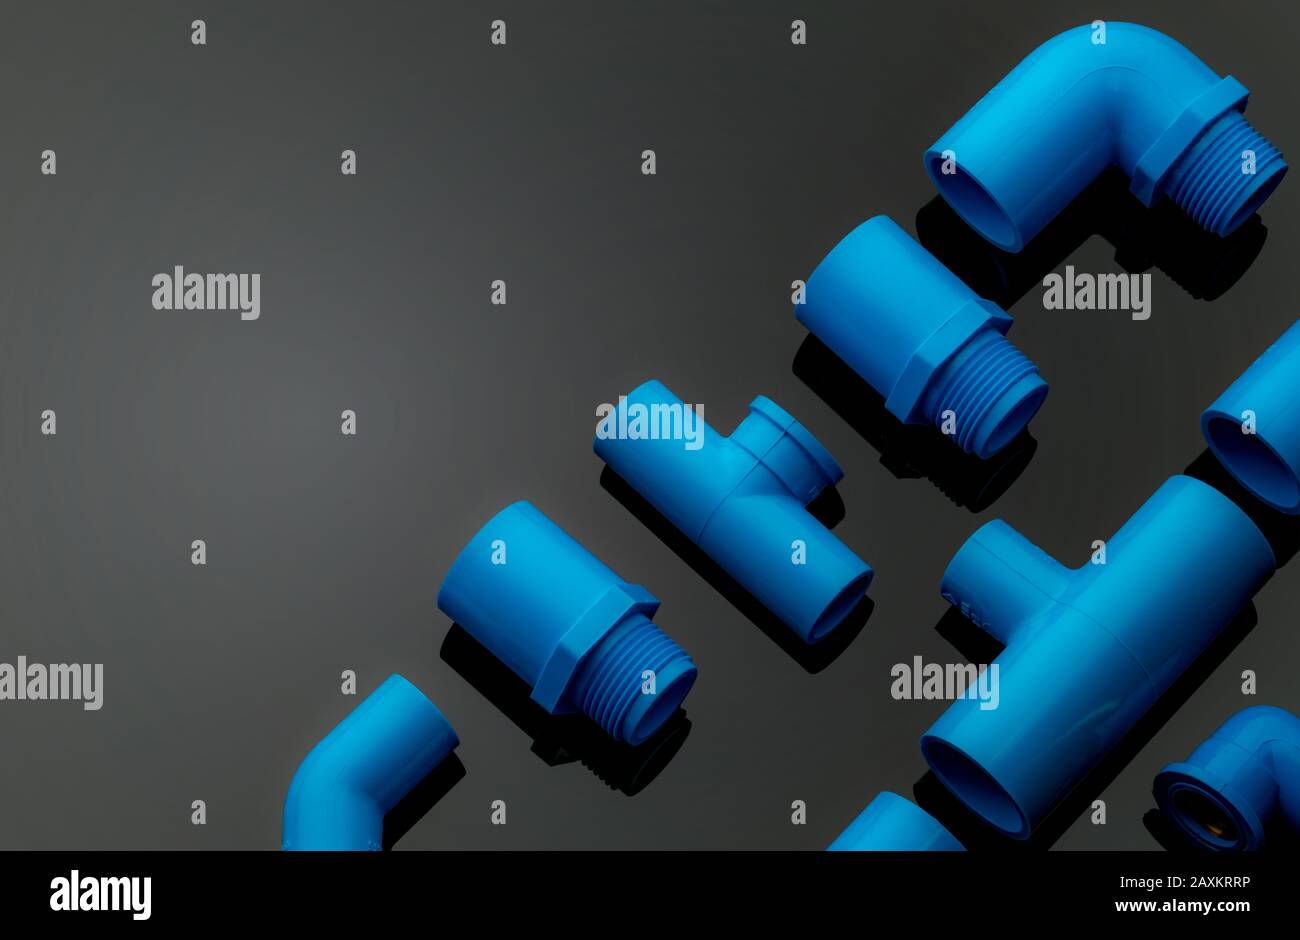 Set of blue PVC pipe fittings isolated on dark background. Blue